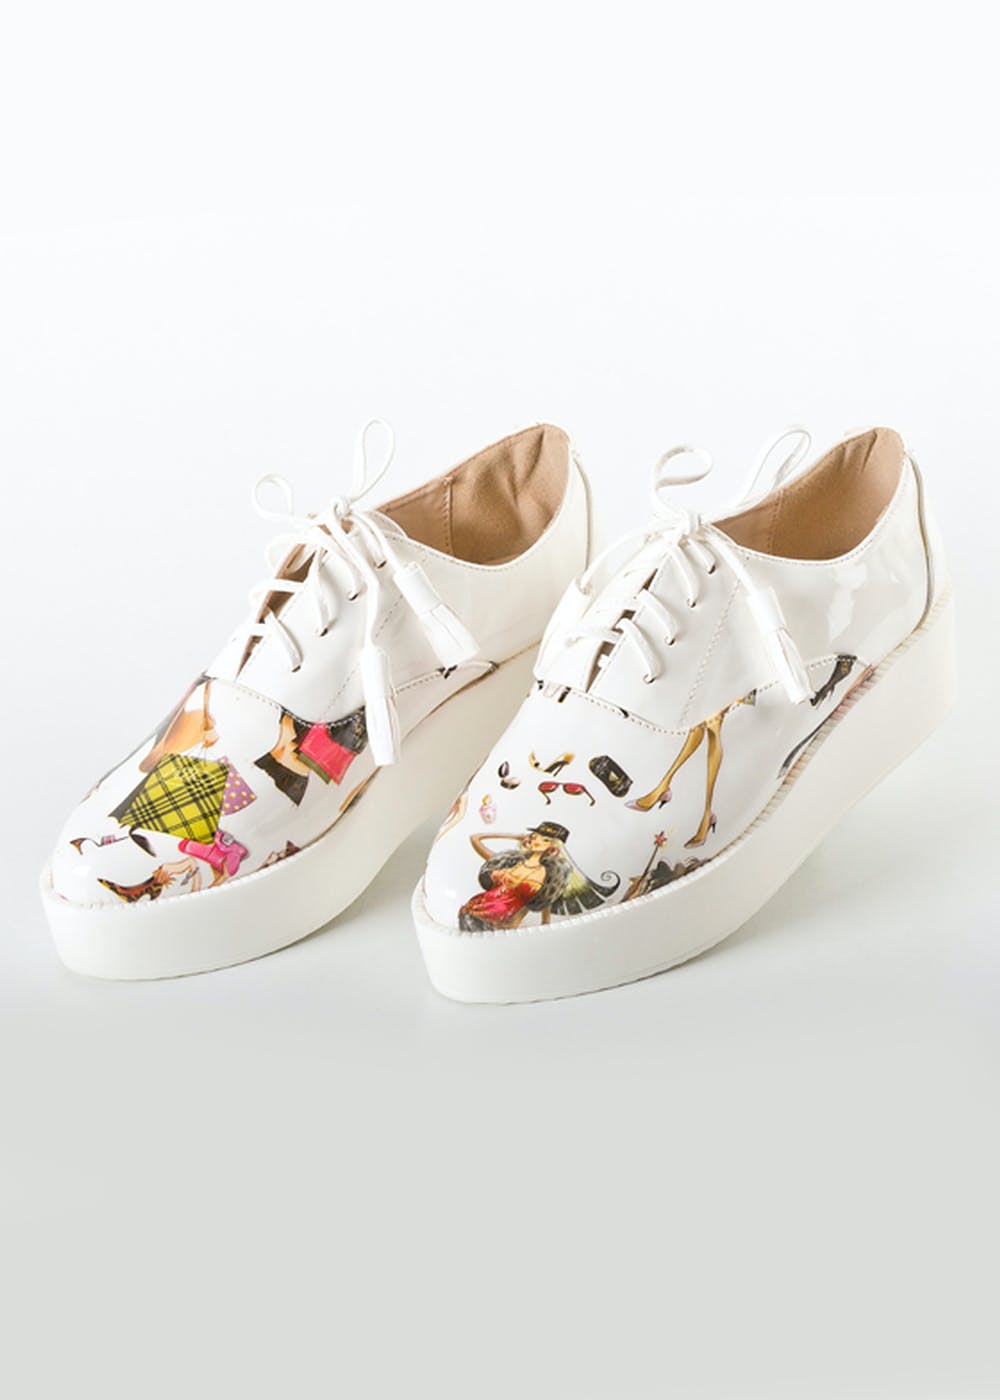 Quirky Graphic Detail White Platform Lace Up Shoes